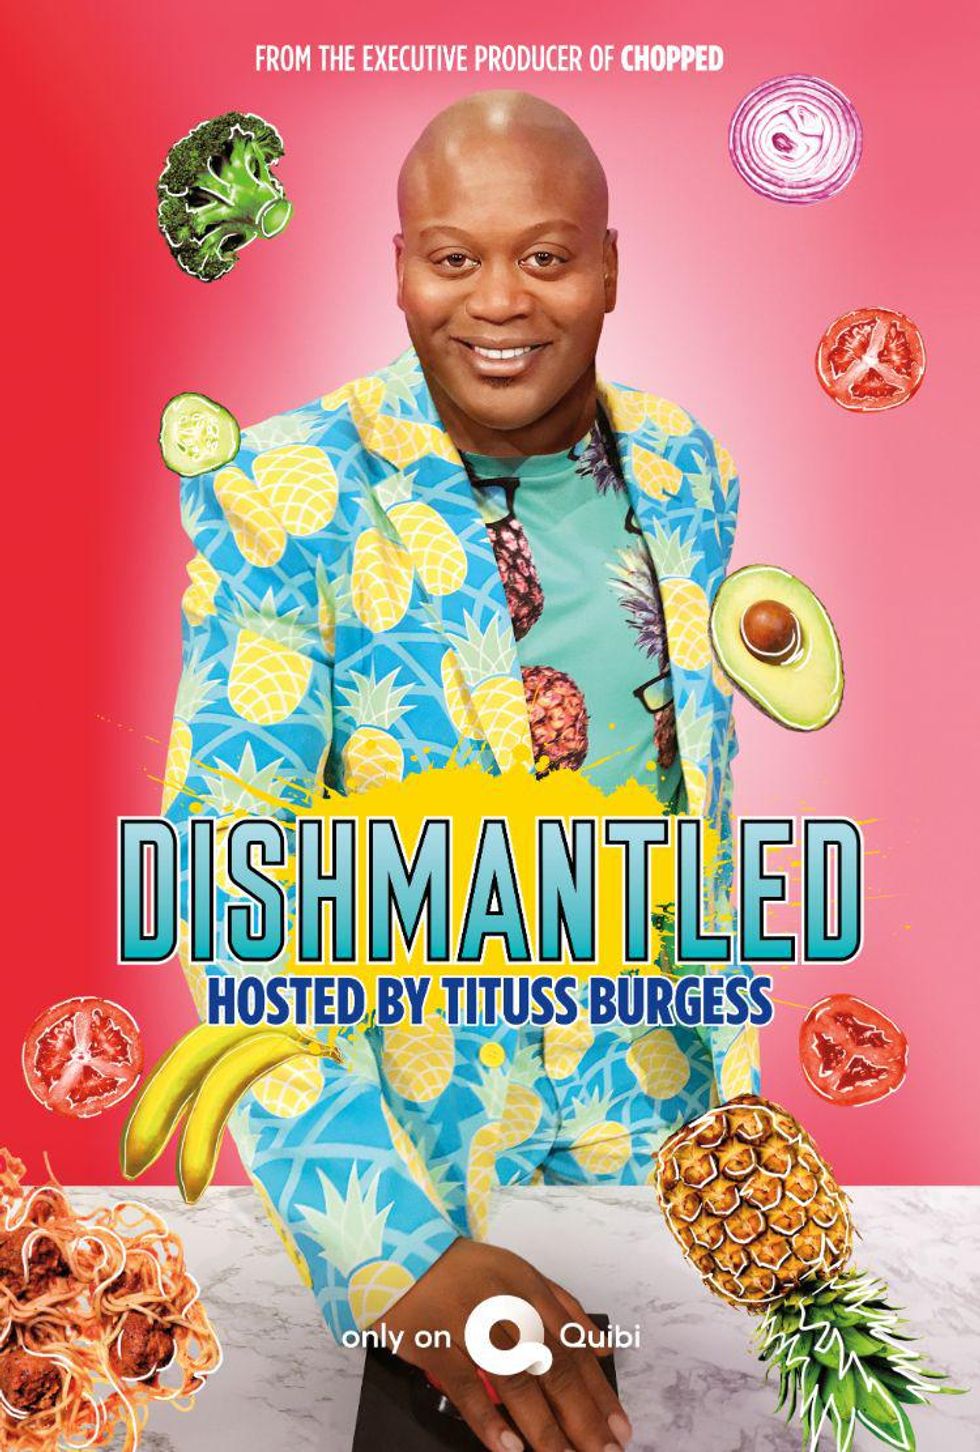 Tituss Burgess Blasts Food into Chef's Faces in Quibi's 'Dishmantled'